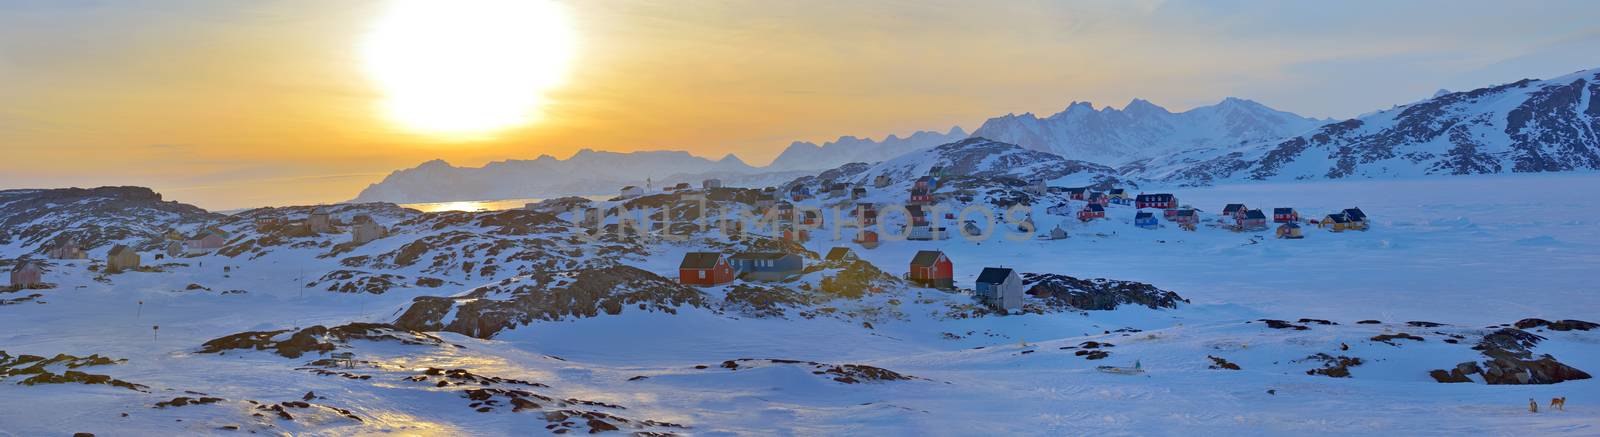 Winter landscape with colorful houses in Kulusuk, Greenland, at sunset